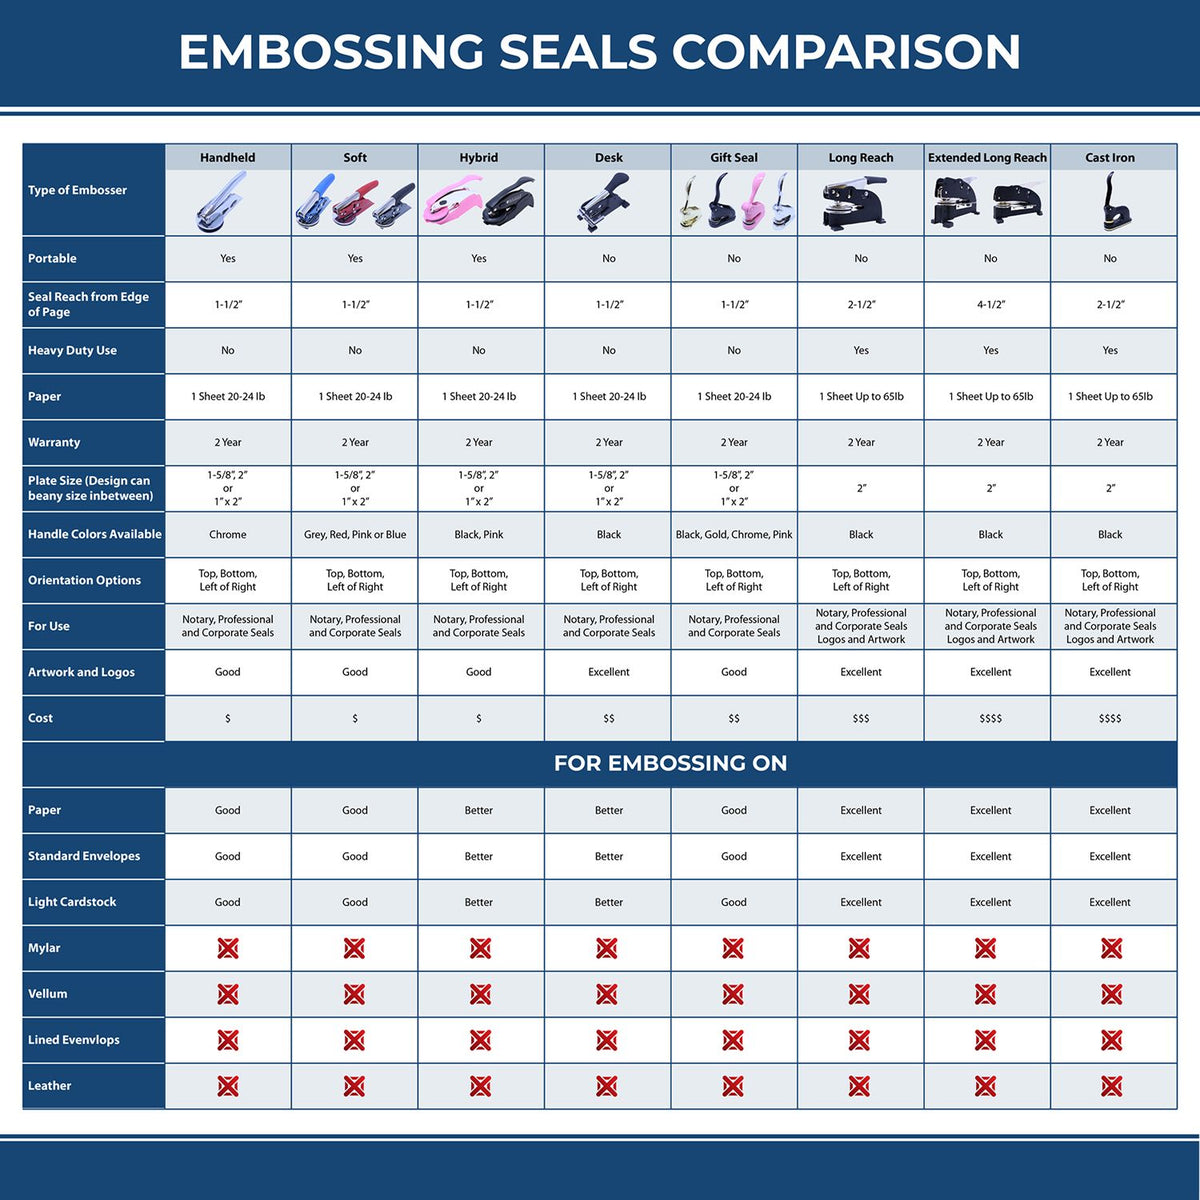 A comparison chart for the different types of mount models available for the New Jersey Engineer Desk Seal.